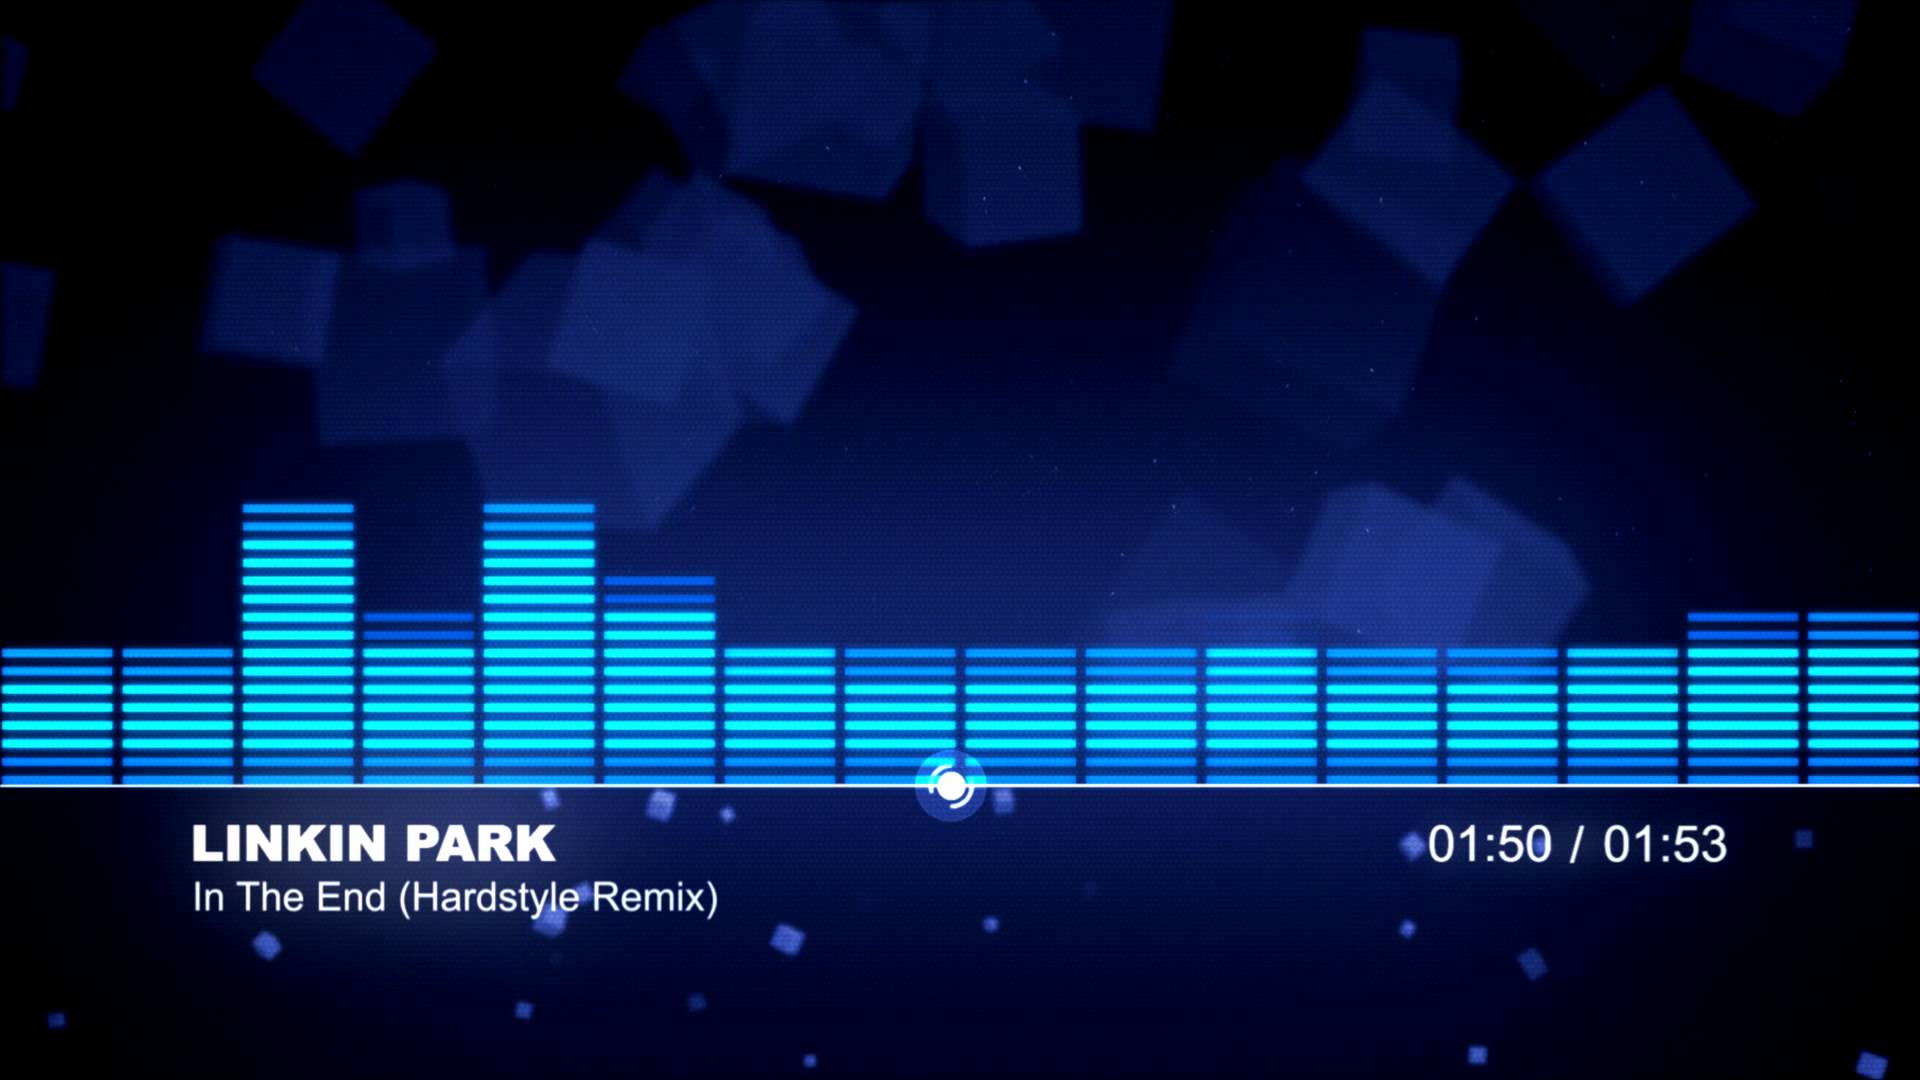 Audio Glow Live Wallpaper - Linkin Park In The End Hardstyle Remix , HD Wallpaper & Backgrounds